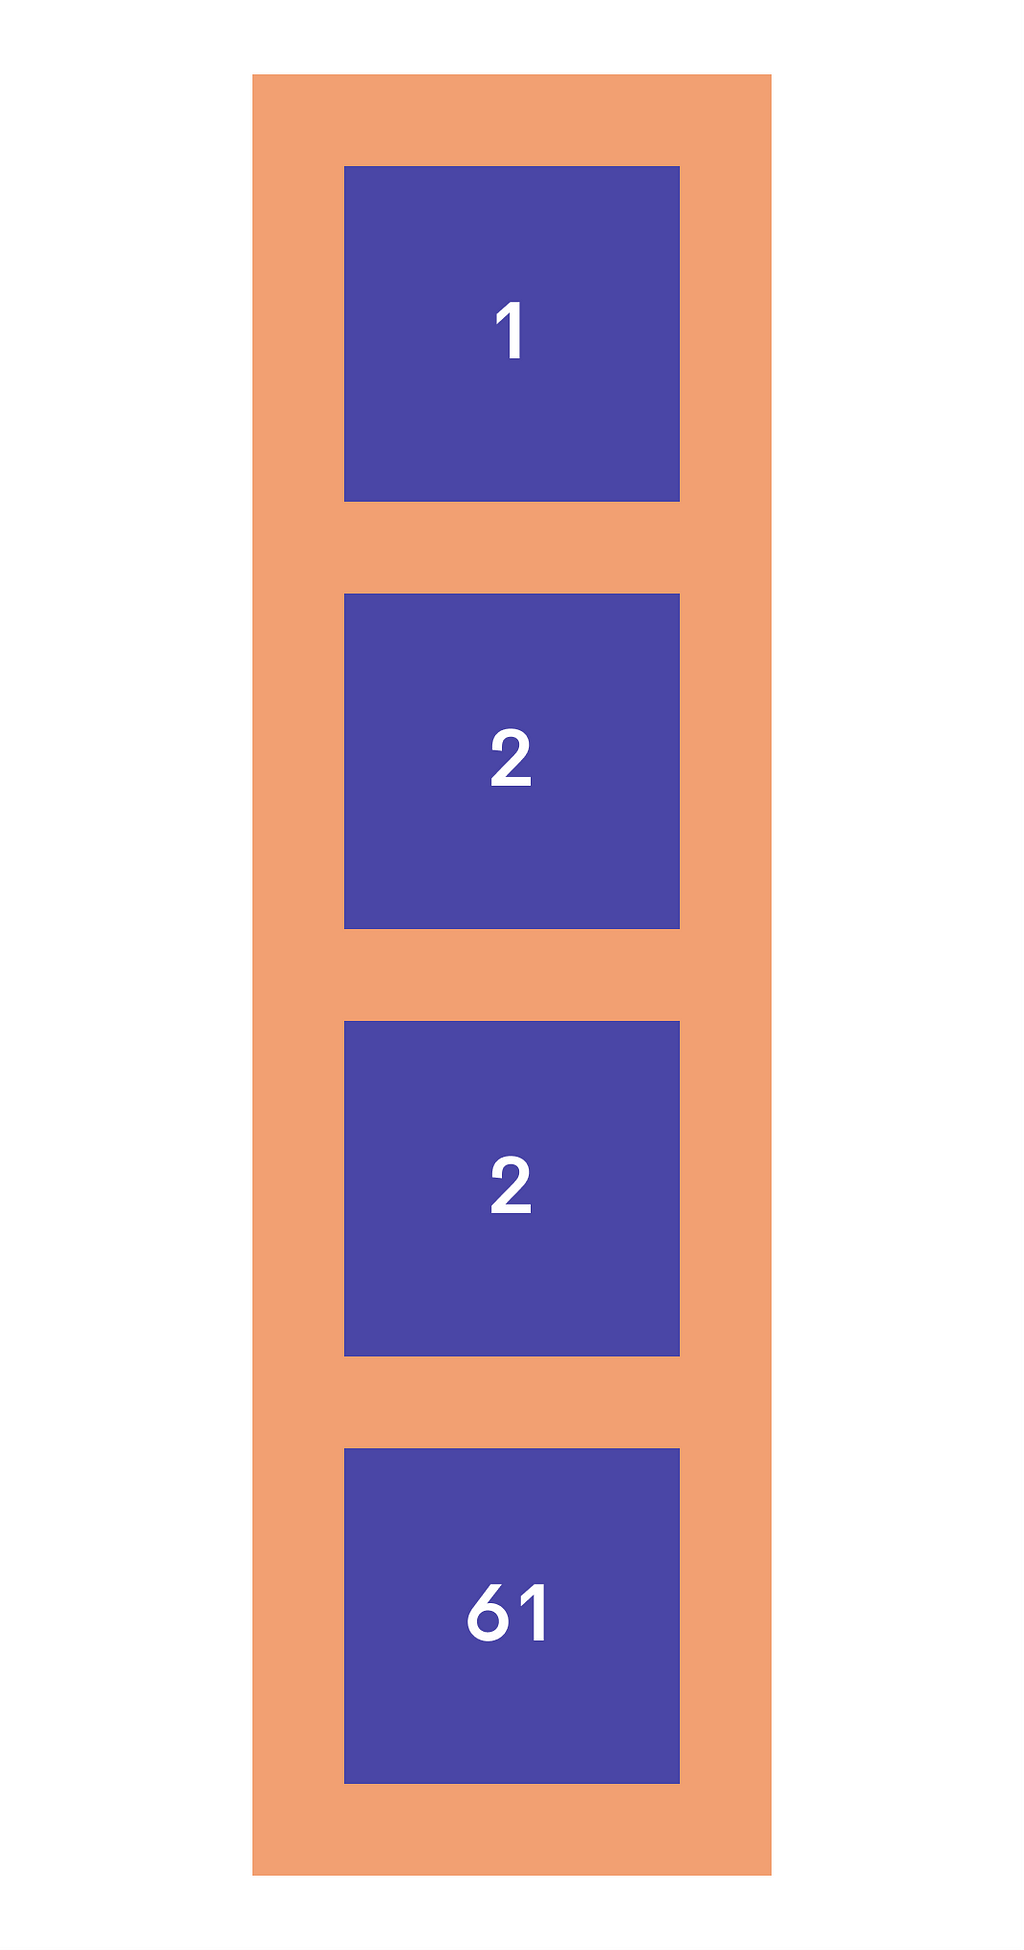 Image of flex children lined up in a column with order values of 1, 2, 2, & 61. The child element with order: 1 is ordered in the first position at the way top of the column and the child element with order: 61 is ordered in the last position at the way bottom of the column